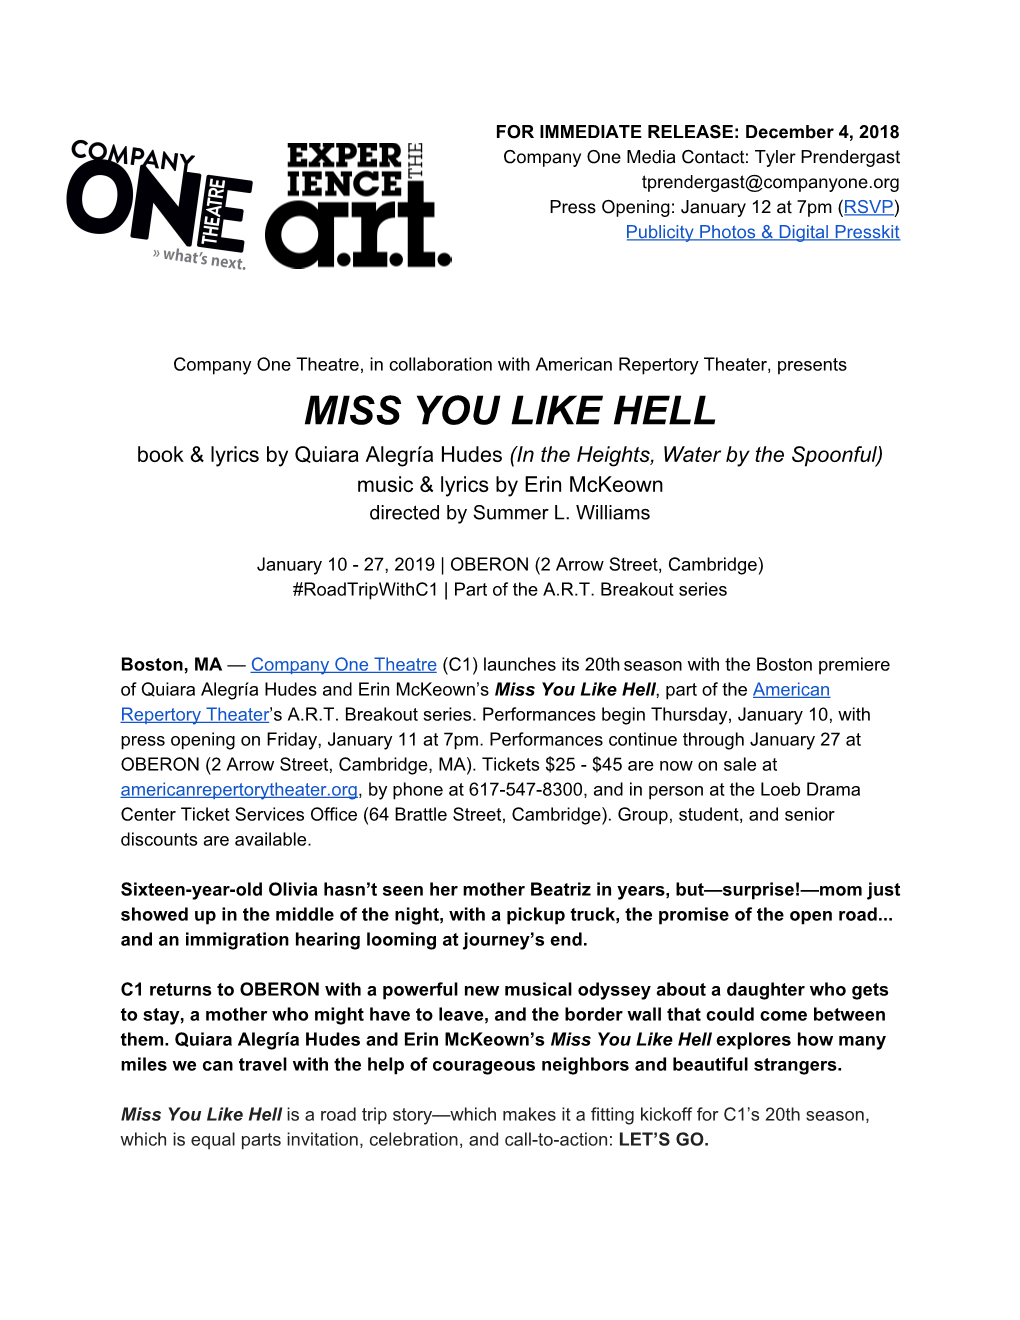 MISS YOU LIKE HELL Book & Lyrics by Quiara Alegría Hudes (In the Heights, Water by the Spoonful) ​ Music & Lyrics by Erin Mckeown Directed by Summer L